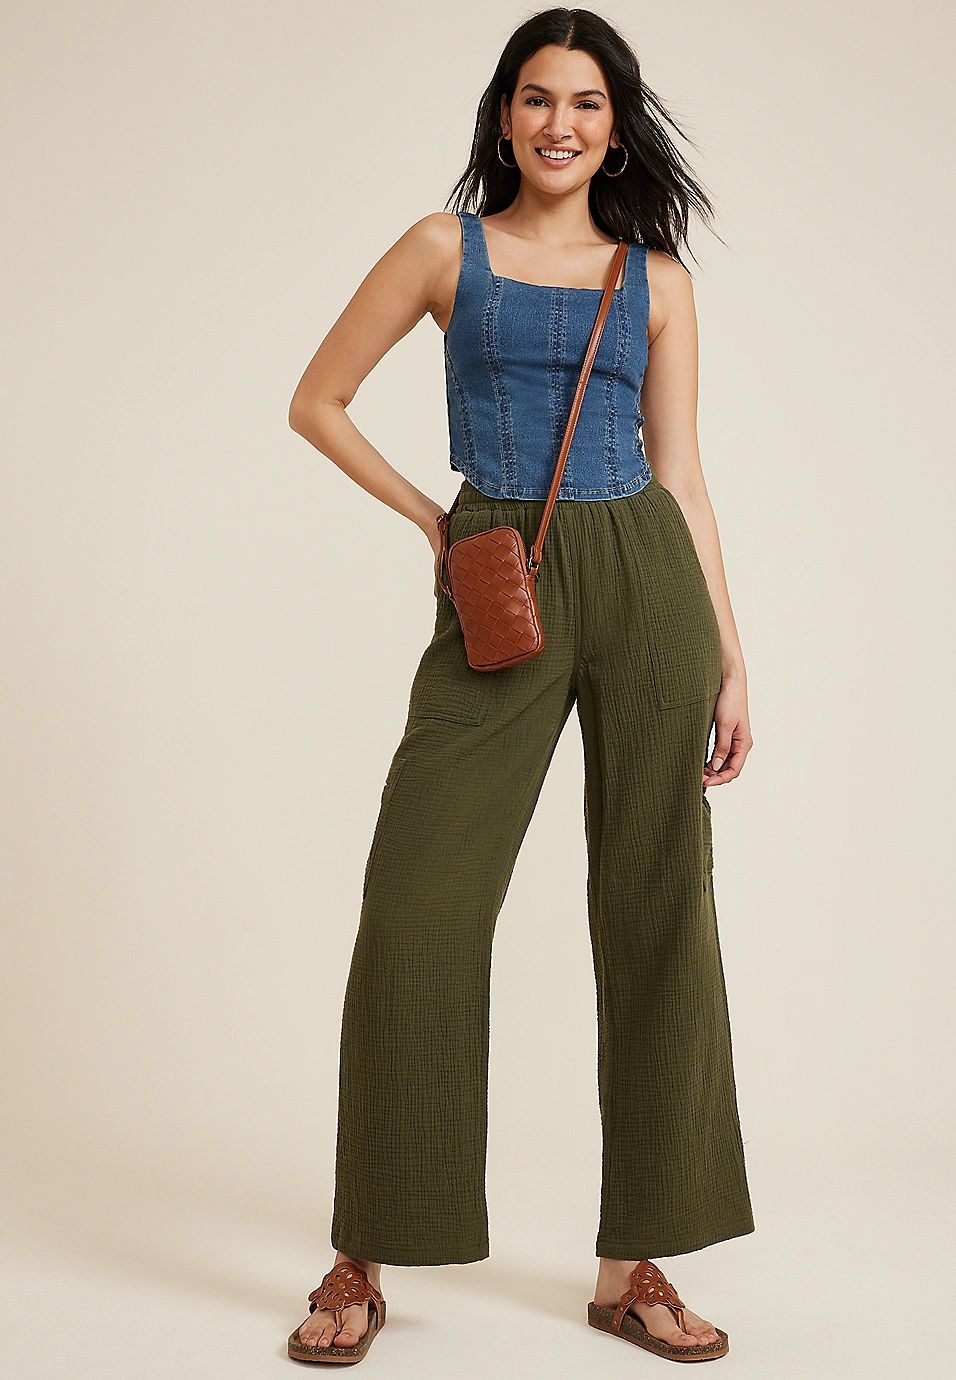 Denim Cropped Corset Tank Top | Maurices